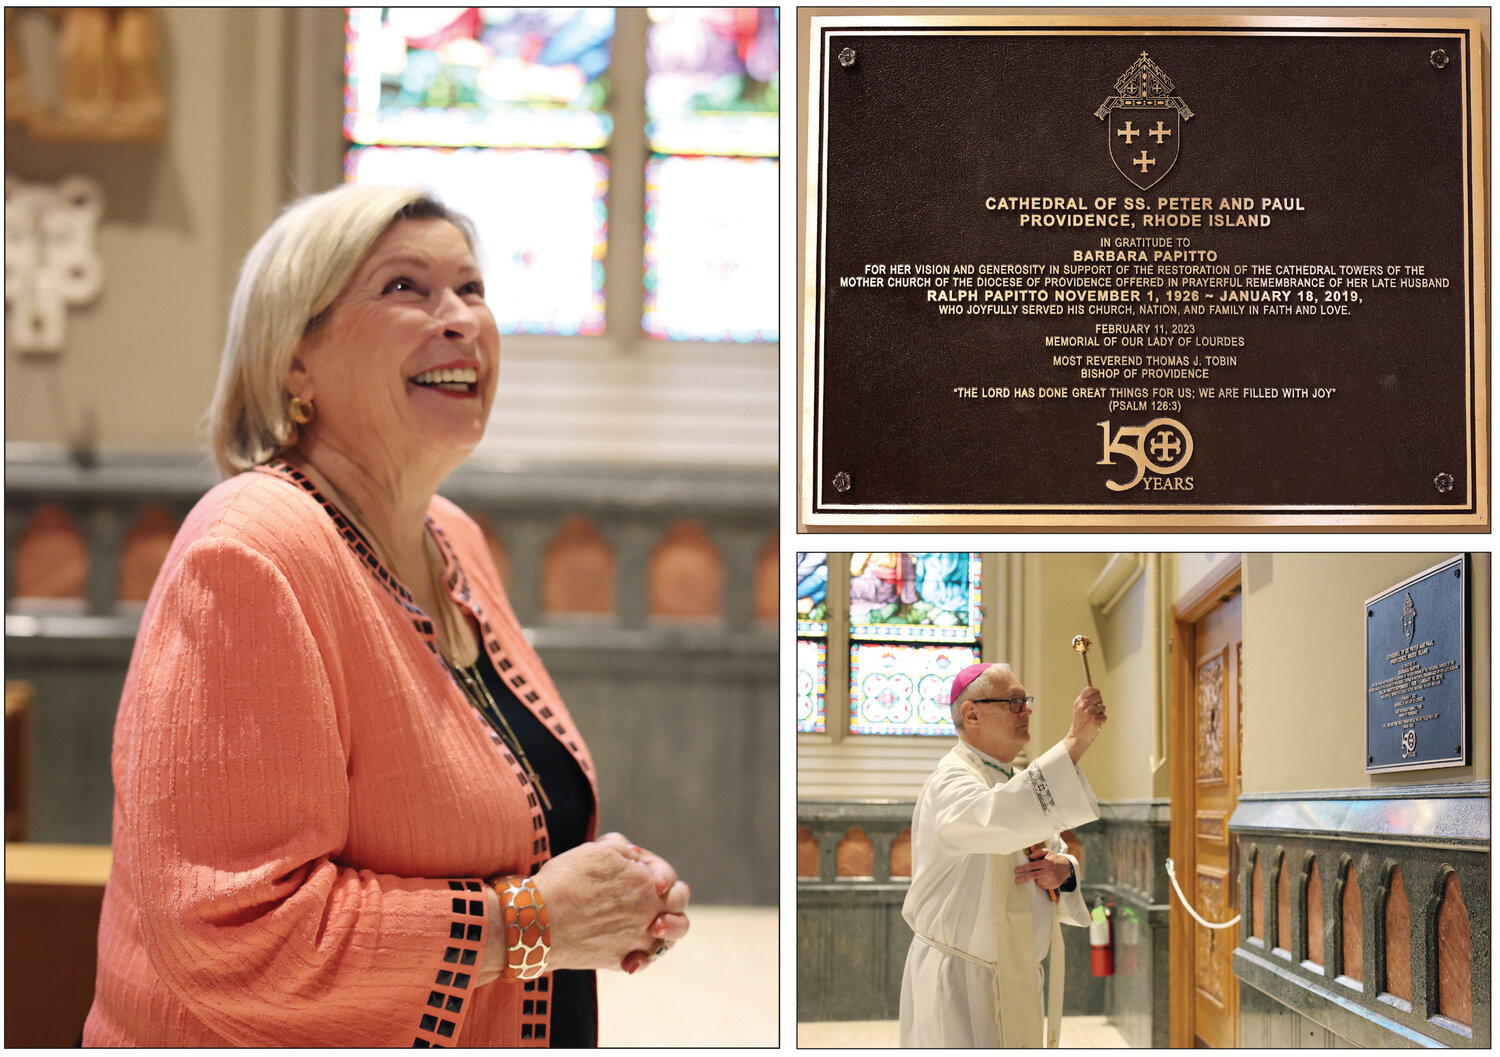 With tears in her eyes, Barbara Papitto admires the plaque with her and her late husband Ralph’s names affixed to the back wall of the Cathedral of SS. Peter and Paul, Providence, recognizing them for their great generosity to the local Catholic church. Papitto visited the cathedral on Monday, April 24, as Bishop Thomas J. Tobin blessed and dedicated the new plaque.